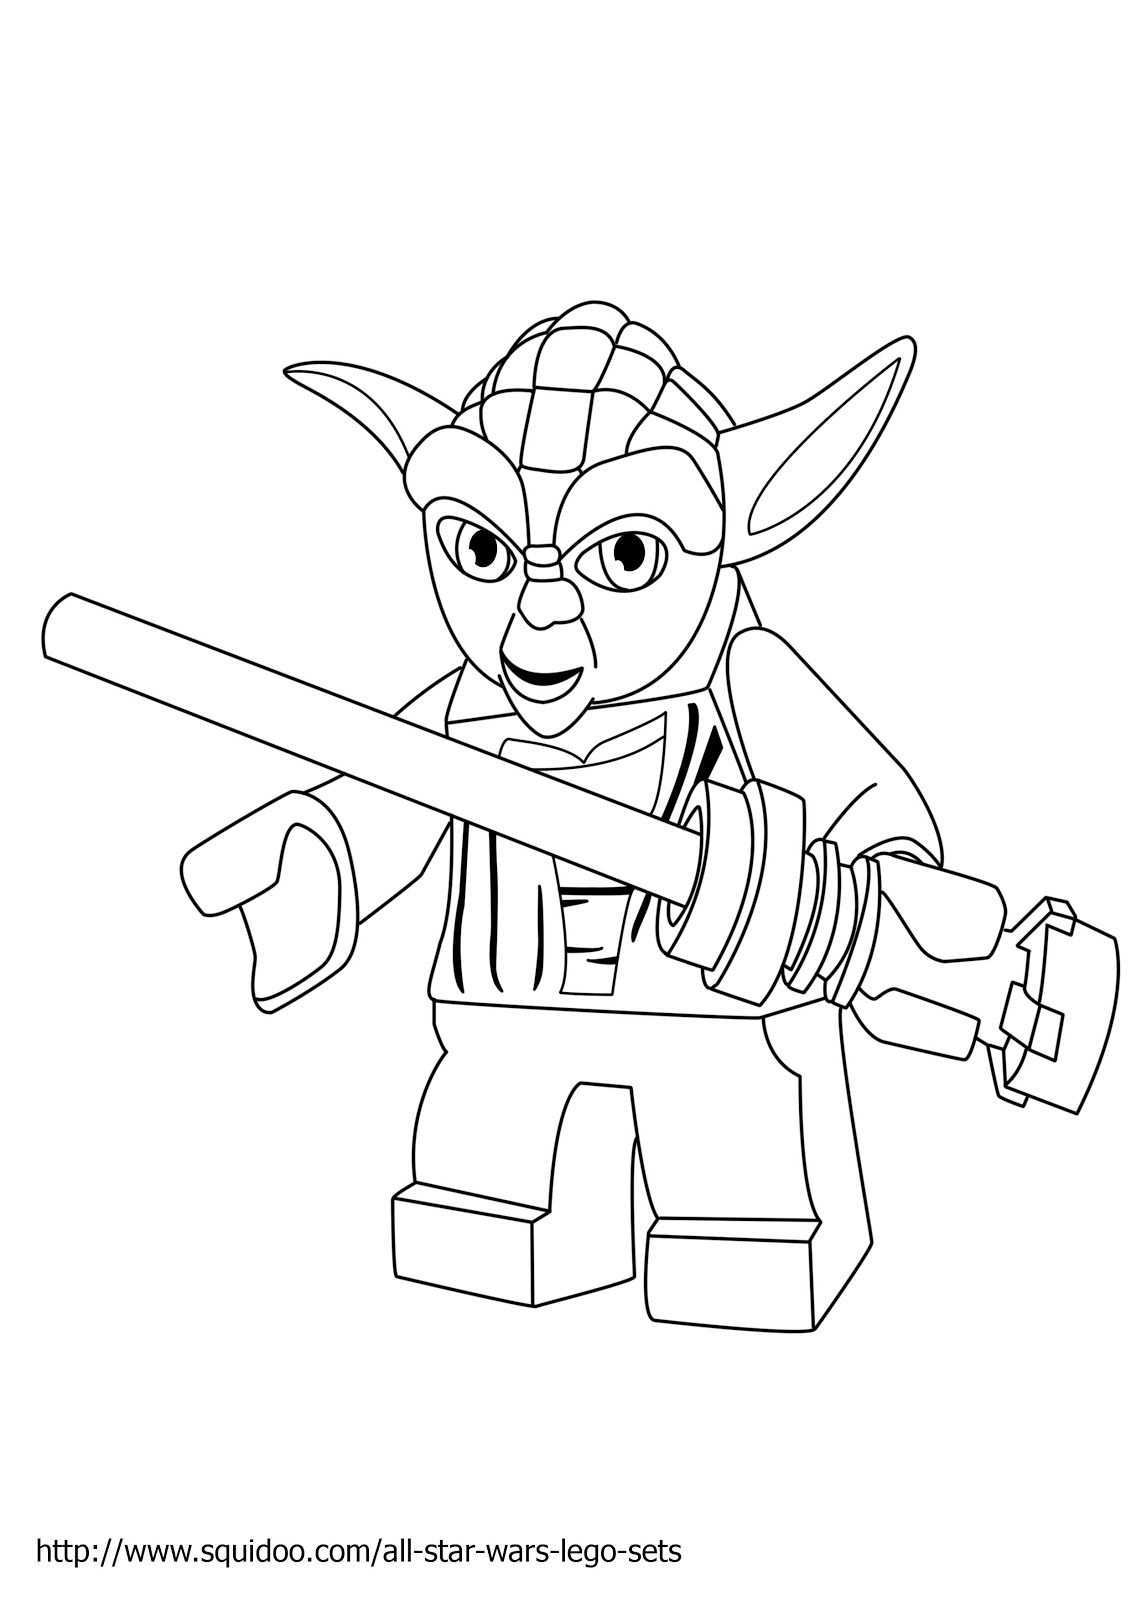 Lego Star Wars Coloring Pages Jpg 1 131 1 600 Pixels Lego Coloring Pages Lego Colorin